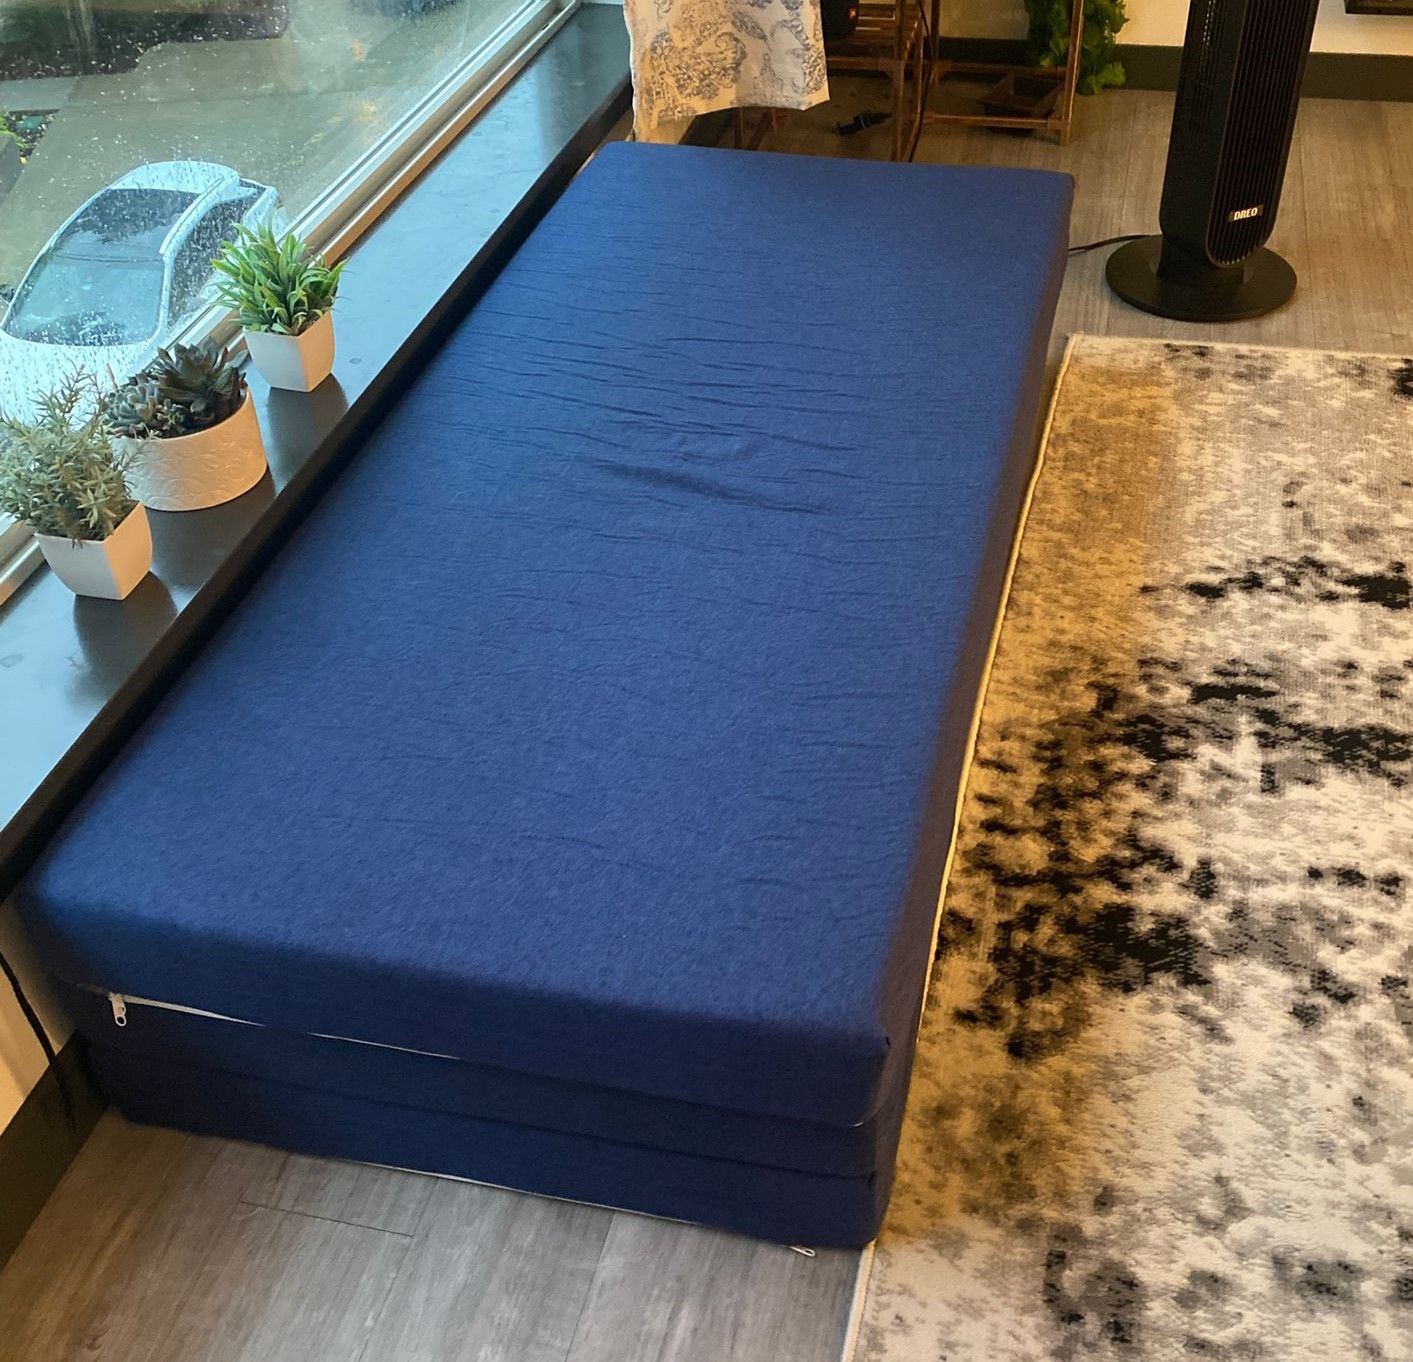 Foldable Mattress folded like a couch